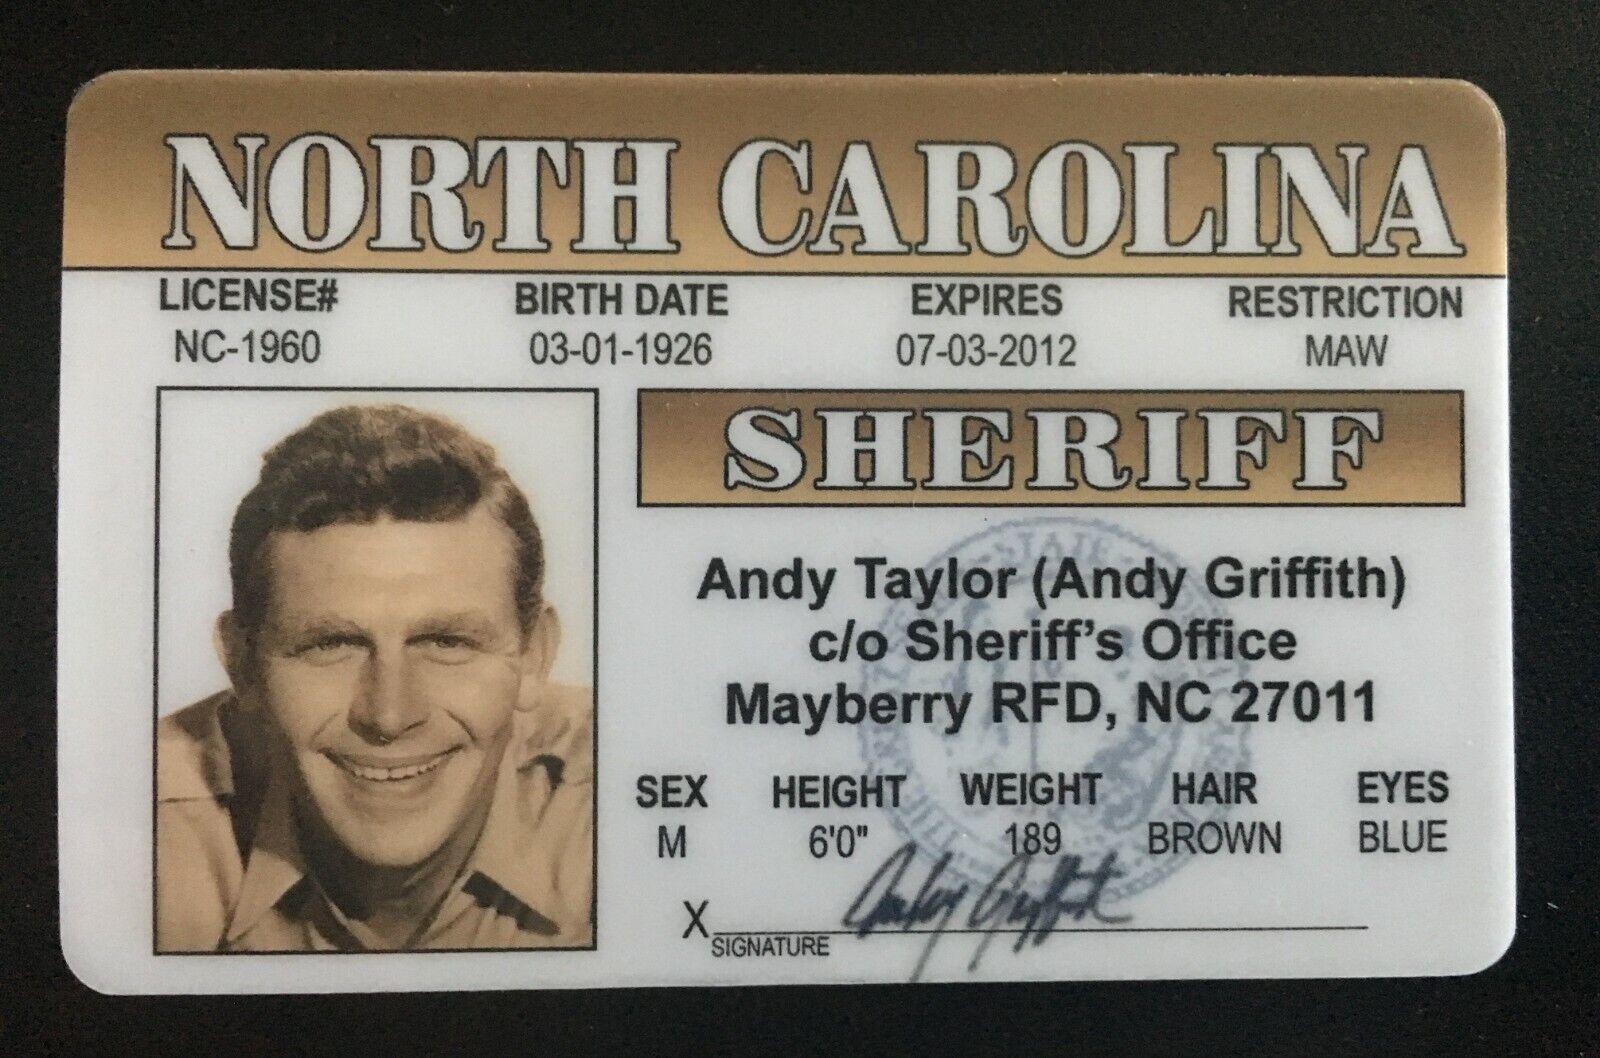 8X10 PUBLICITY PHOTO AZ945 SHERIFF ANDY TAYLOR IN "THE ANDY GRIFFITH SHOW" 